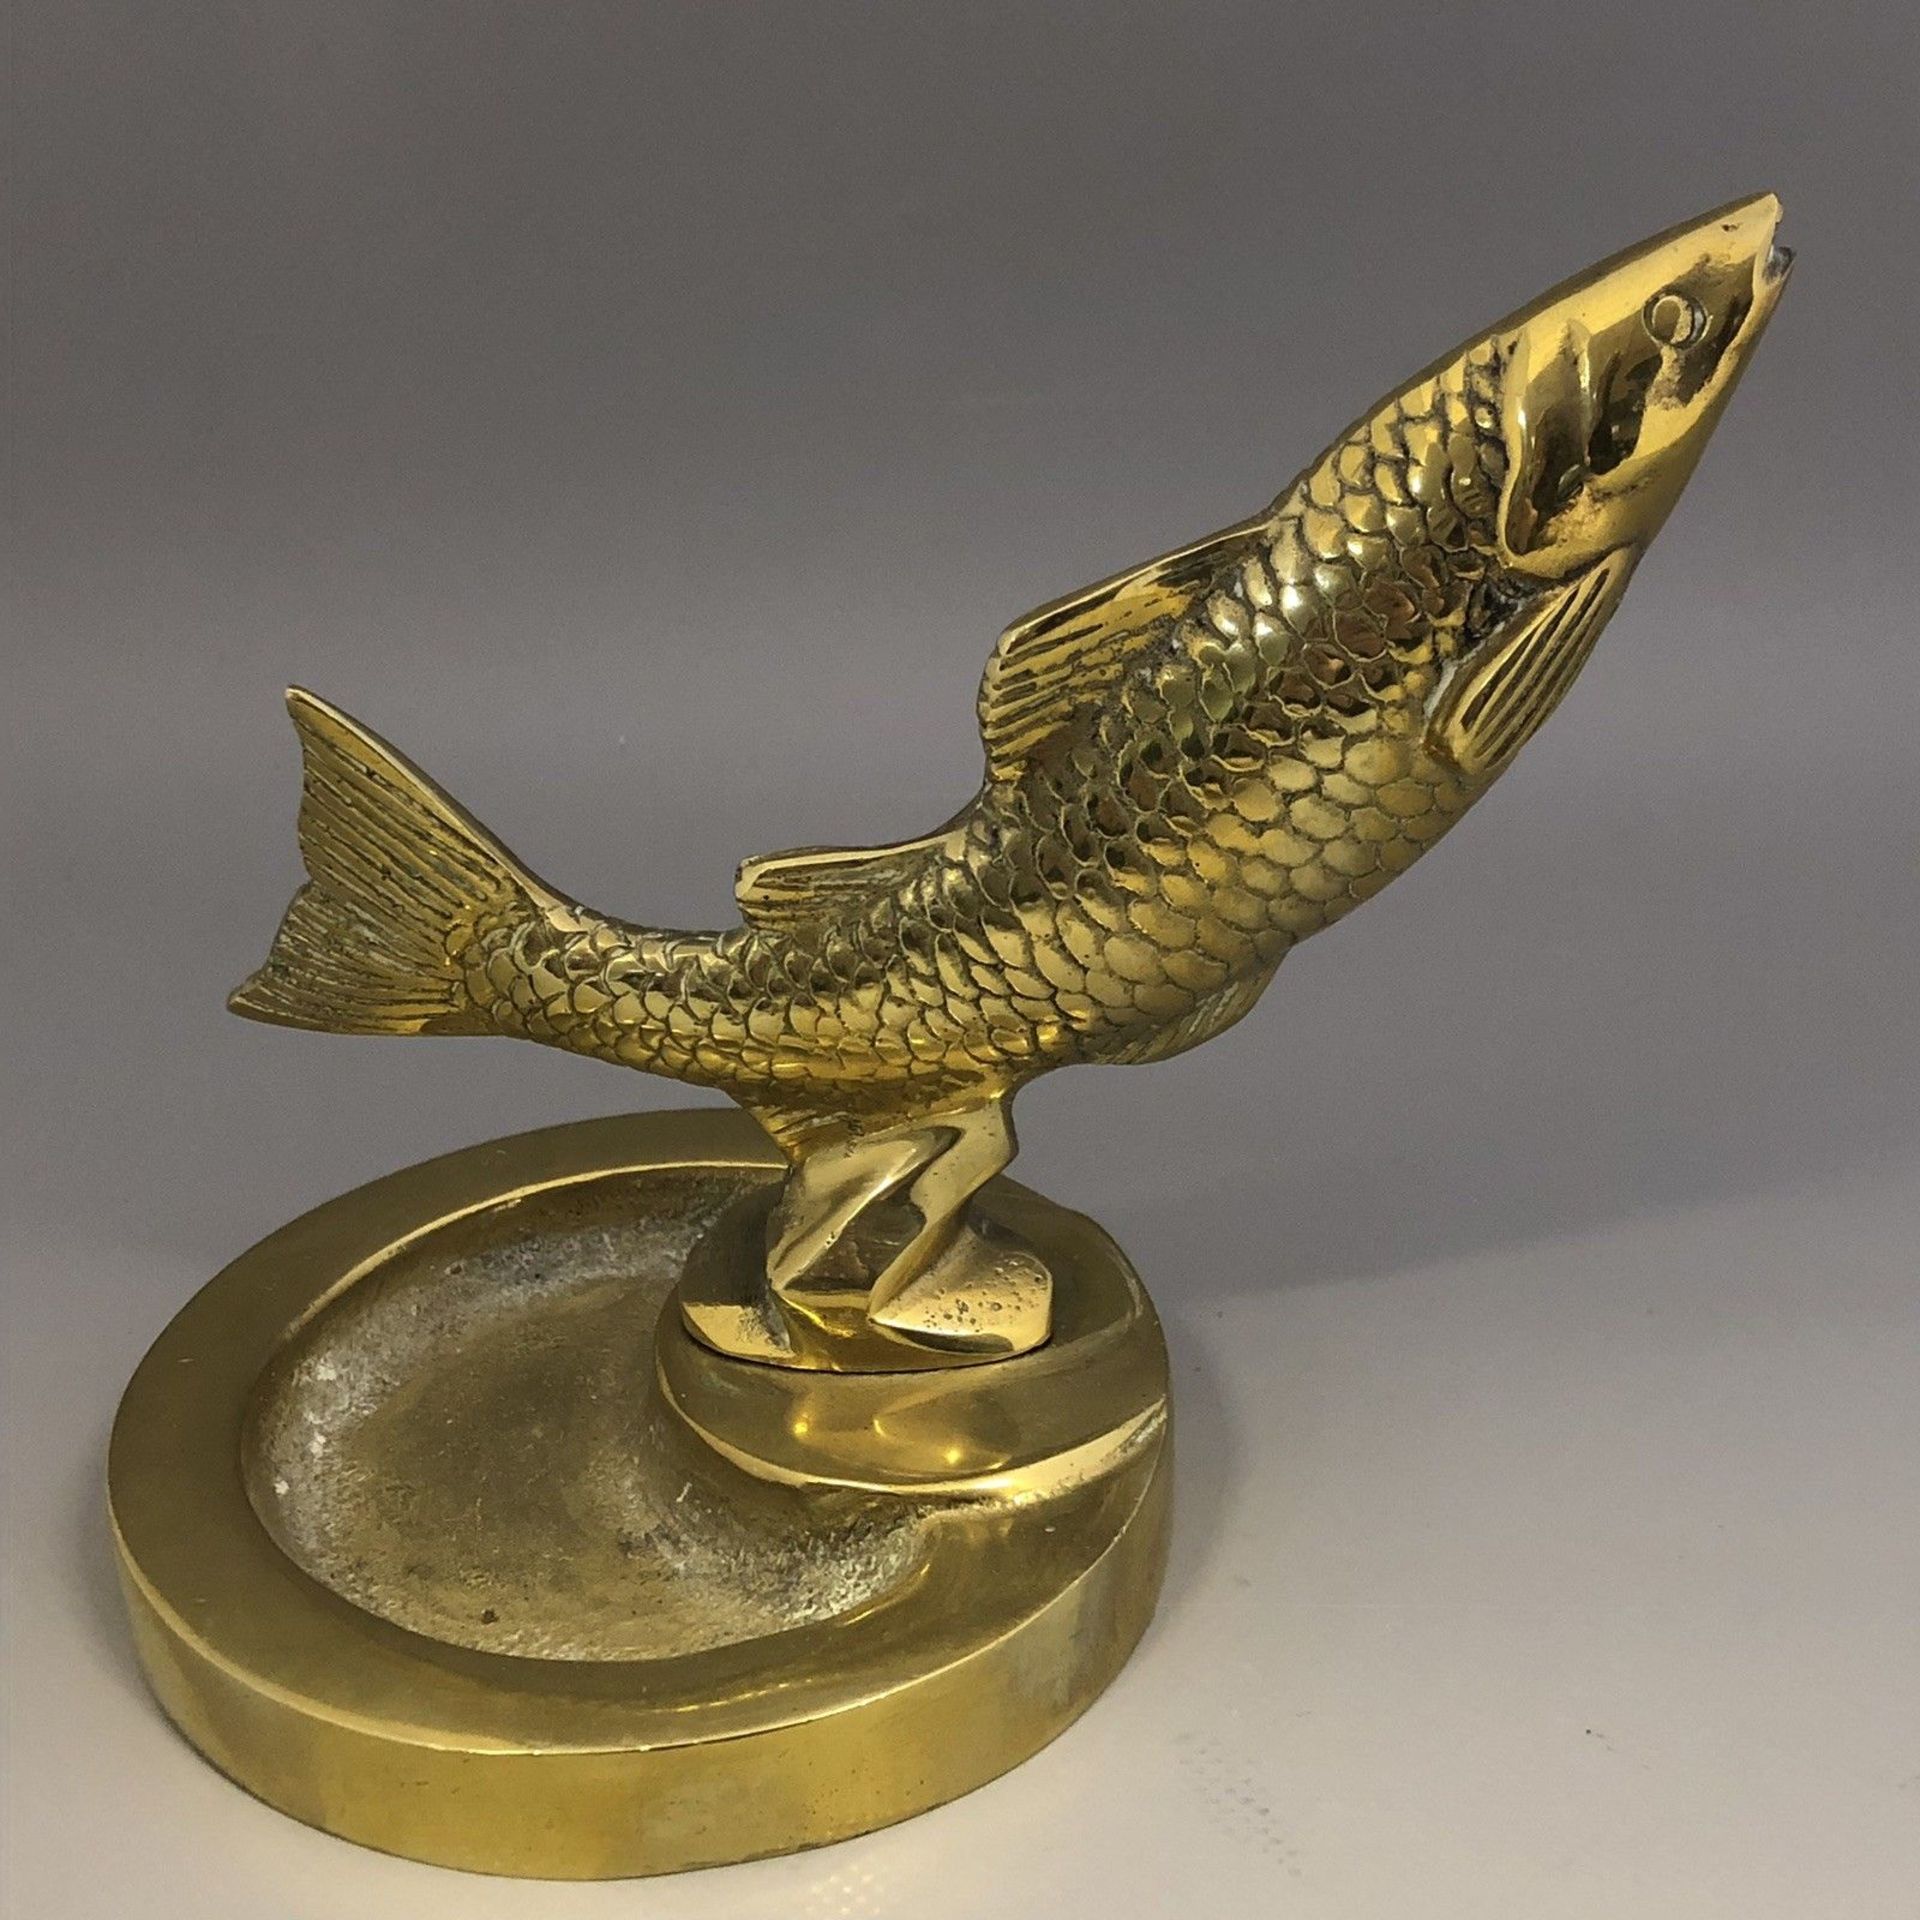 Vintage cast brass ashtray with leaping salmon mount fishing interest car mascot - Image 2 of 6